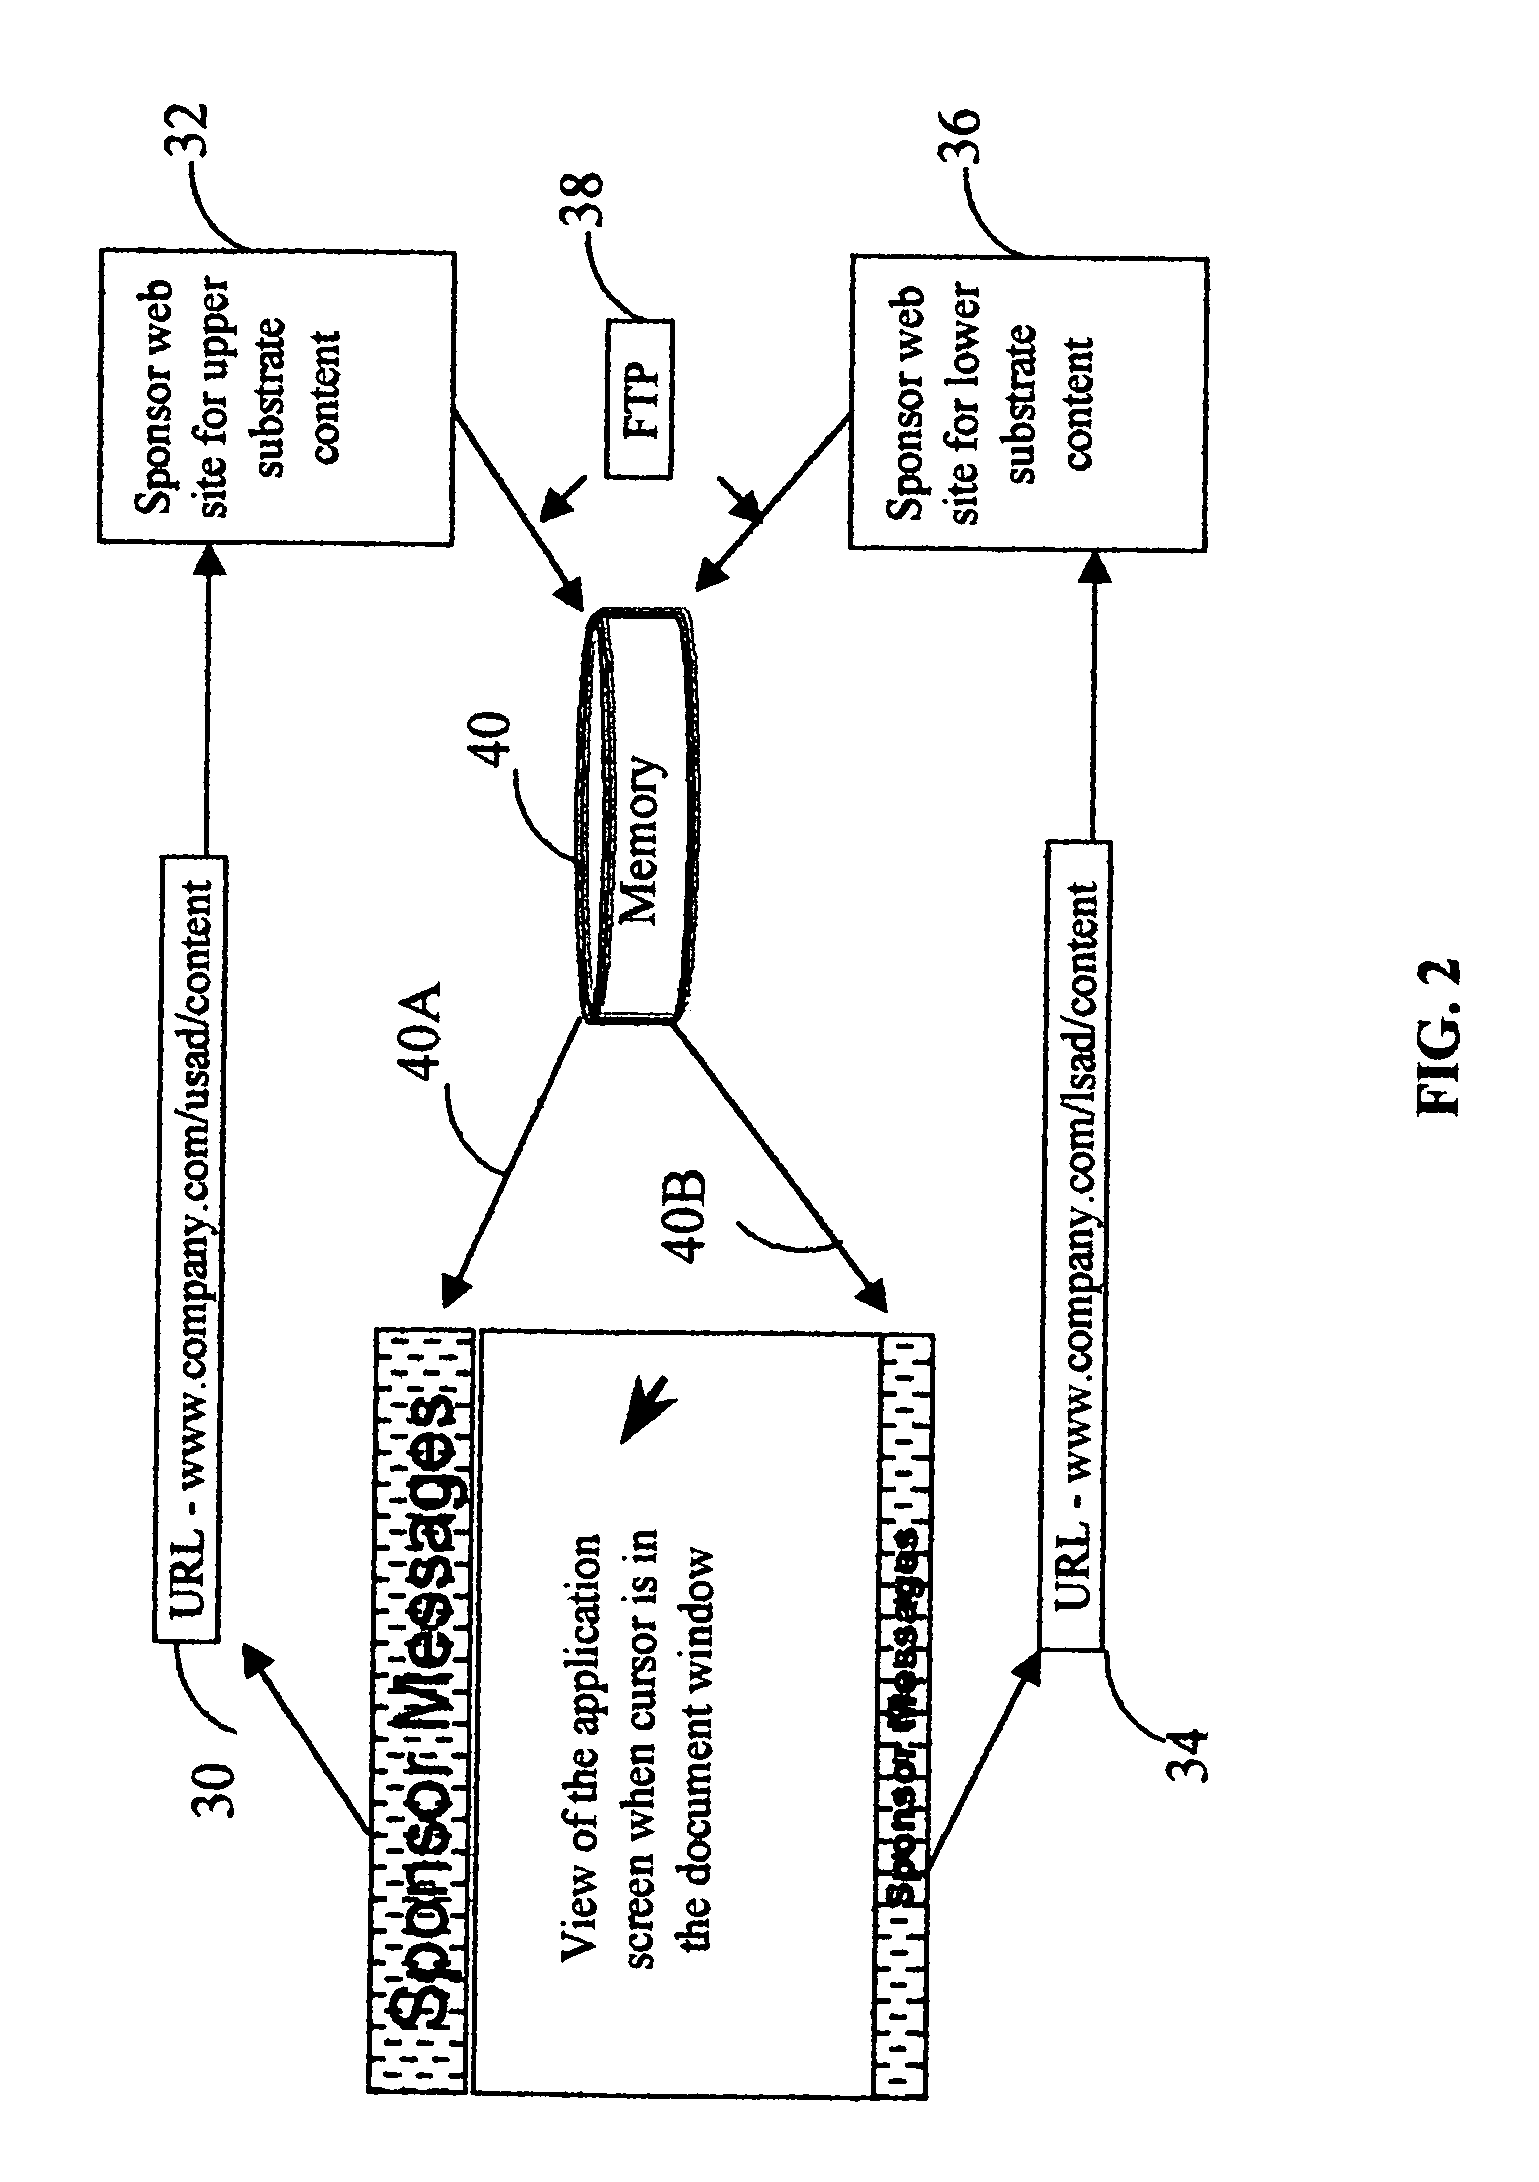 Method and system of creating floating windows for displaying sponsor information, messages or programs in non-obtrusive areas of the graphic user interface of a software application